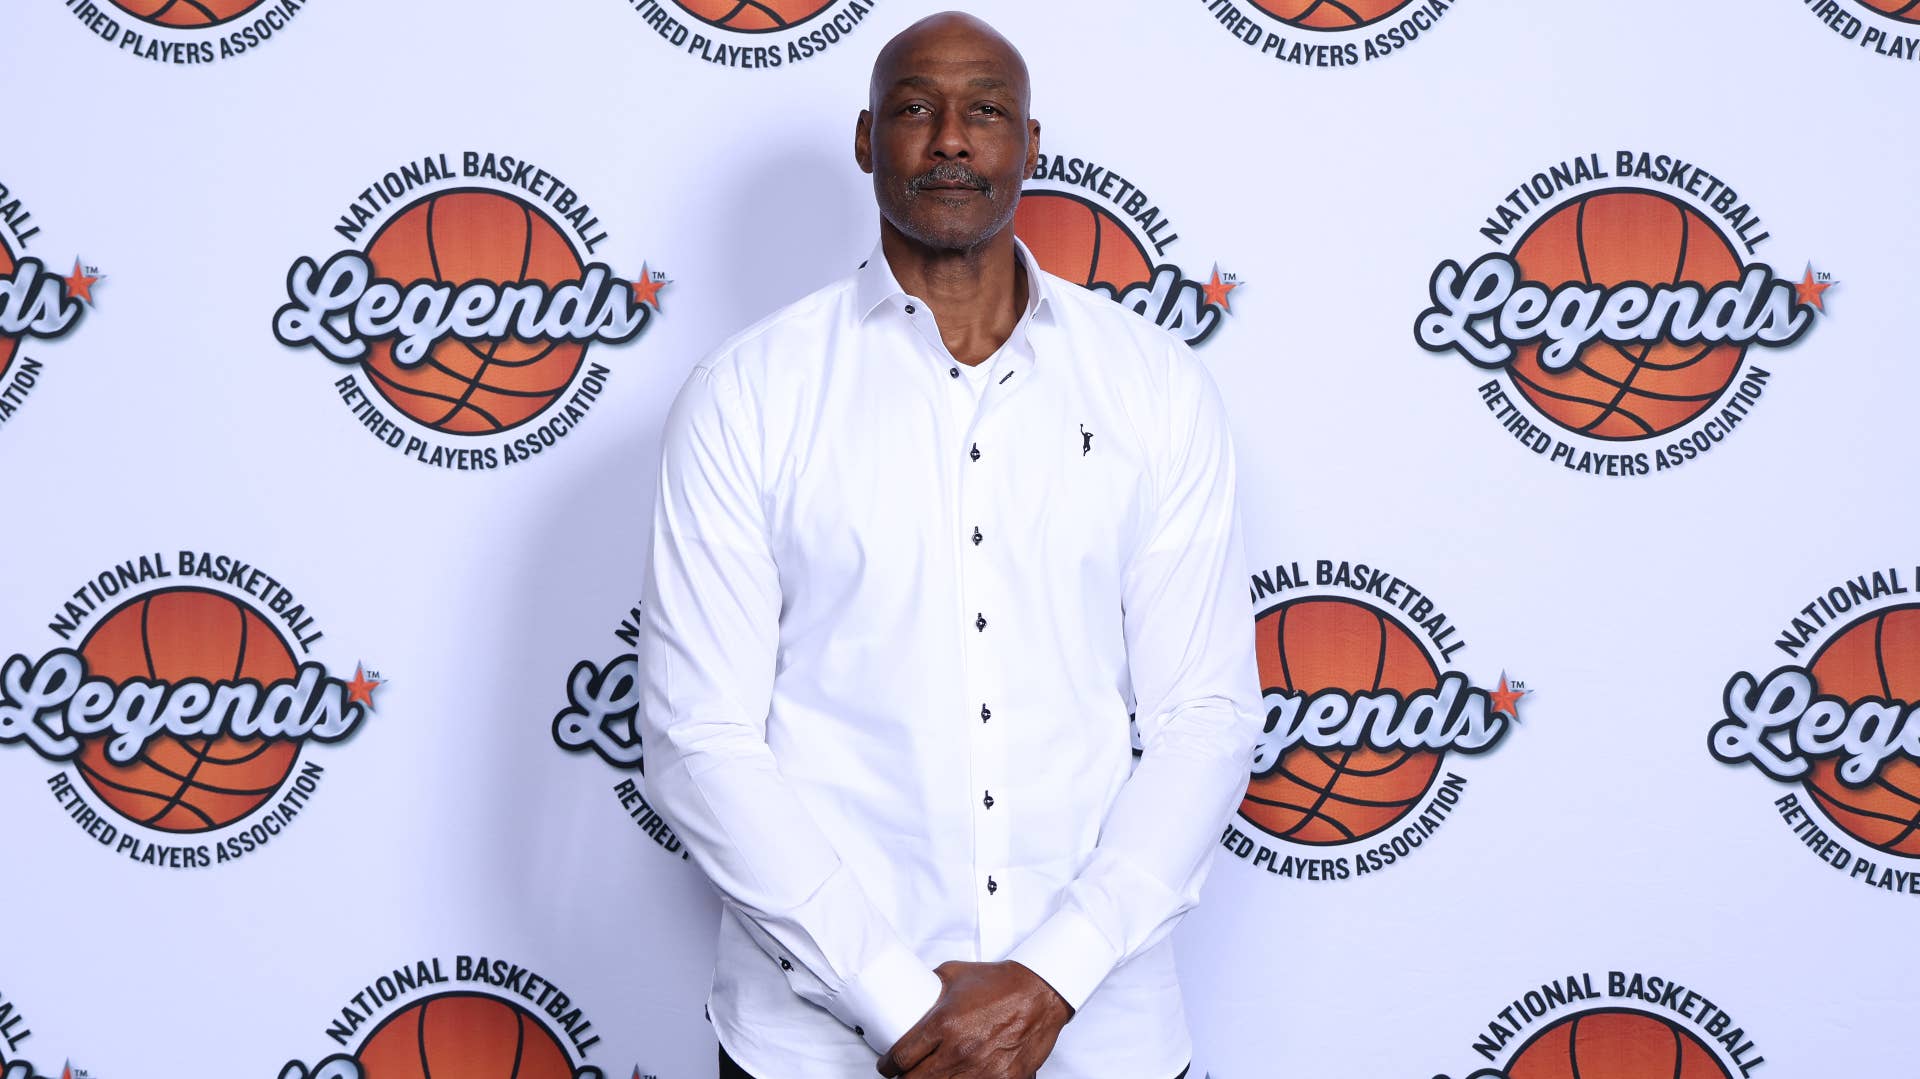 Karl Malone during the NBA Legends Brunch Portraits as part of 2023 NBA All Star Weekend.